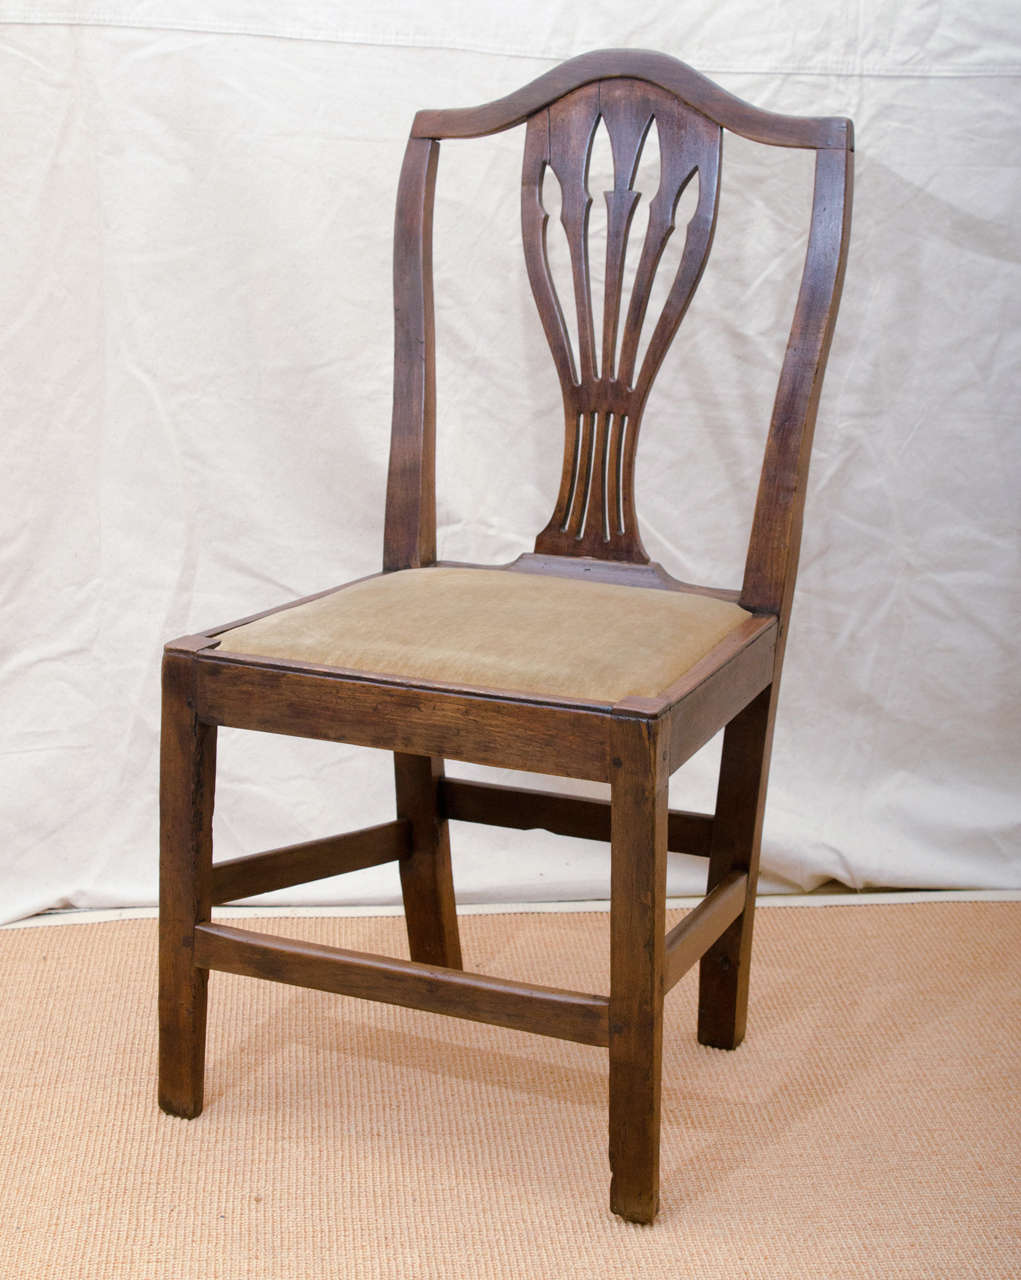 English late 18th century oak arrow cut-out -- shield back -- Hepplewhite design country side chair with slip seat. The square slightly tapered legs are joined by stretchers on all four legs. Handy useful chair for a writing table or extra pull up.